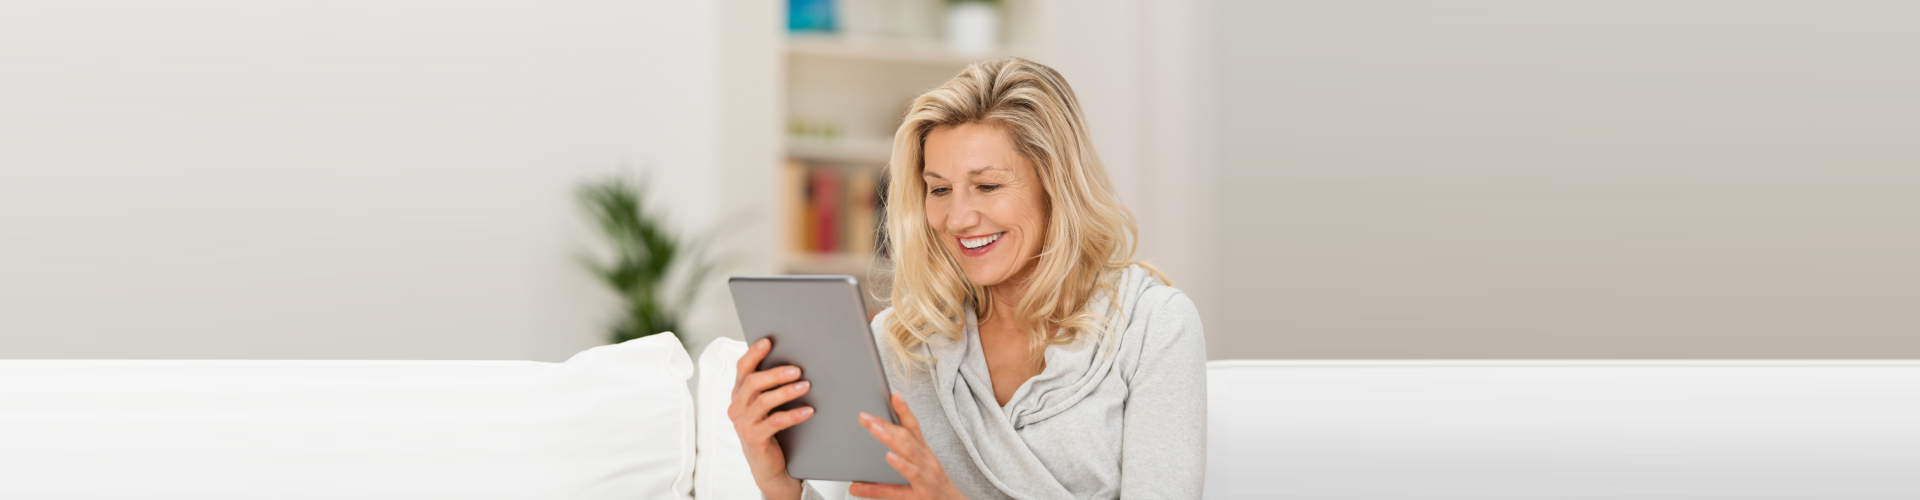 senior woman using a tablet smiling